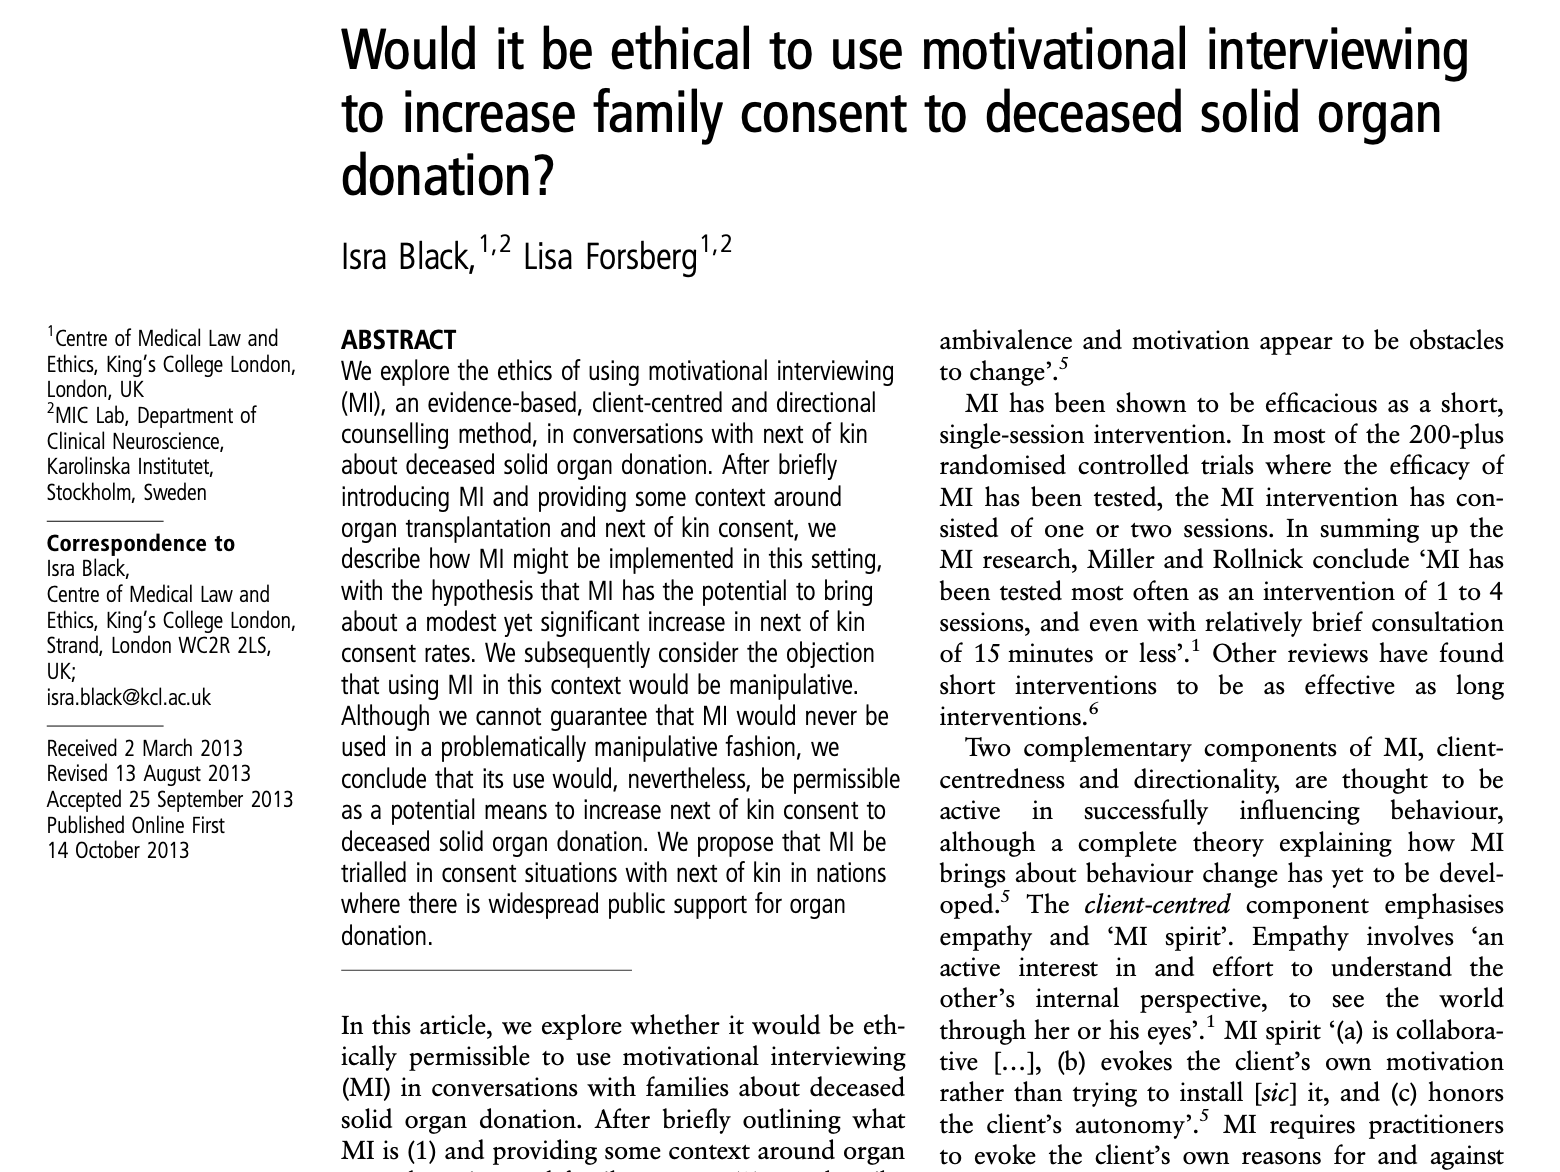 would it be ethical to use motivational interviewing to increase family consent to deceased solid organ donation?